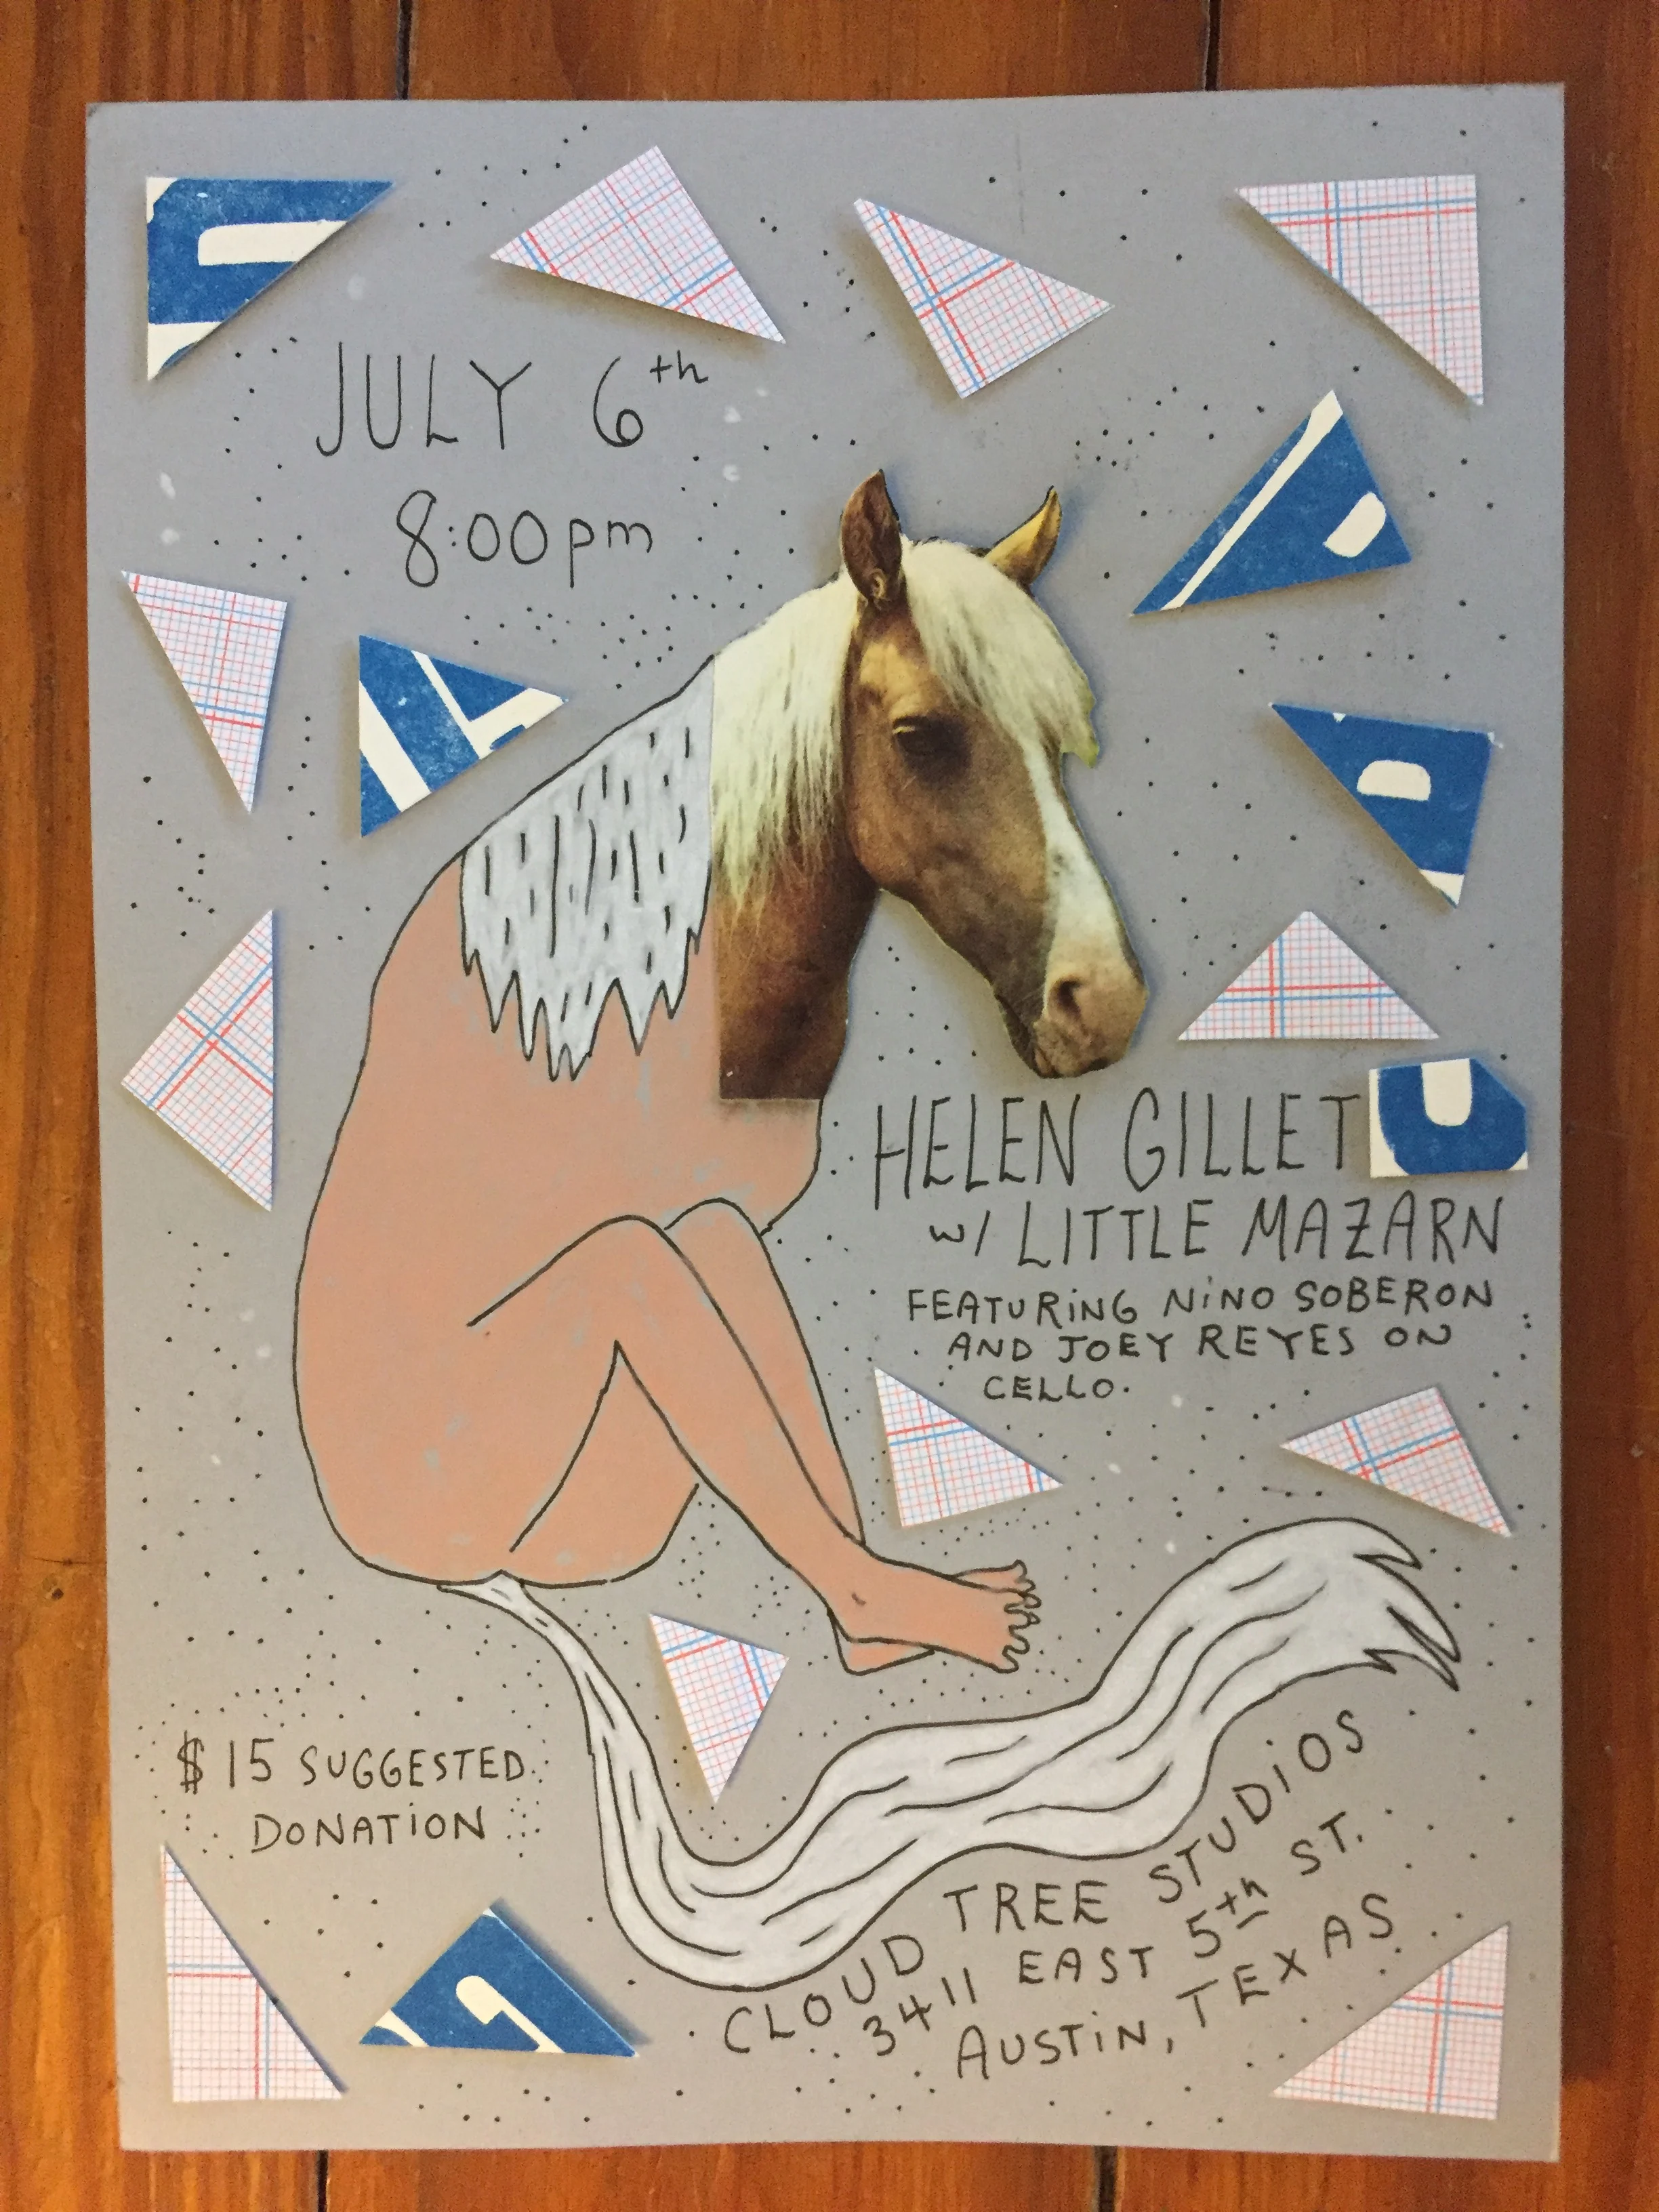 July 6th 8:00pm Helen Gillet w/ Little Mazarn featuring Nino Soberon and Joey Reyes on cello. $15 suggested donation. Cloud Tree Studios 3411 East 5th St., Austin, TX